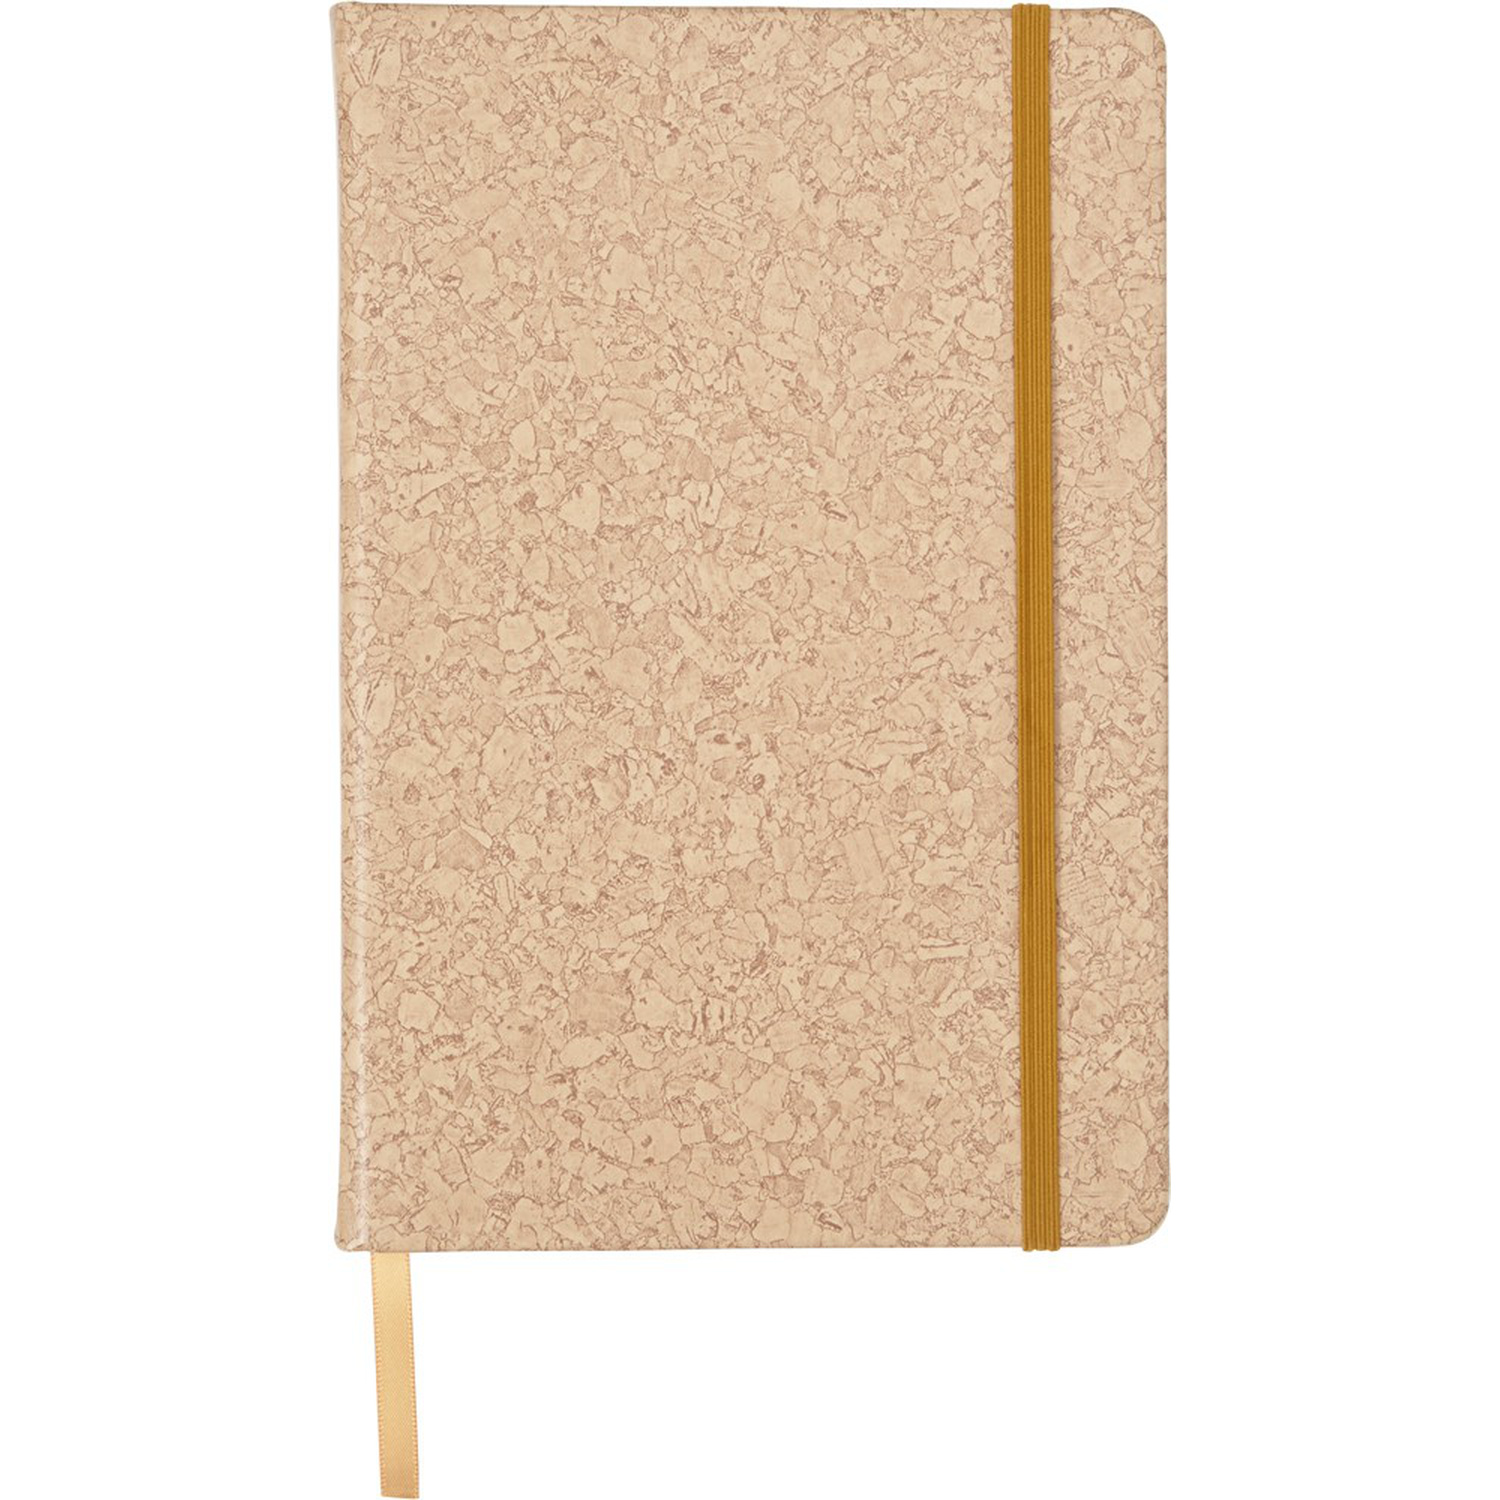 007257 011999999 2d090 frt pro03 fal - Notebook with cork print (approx. A5)